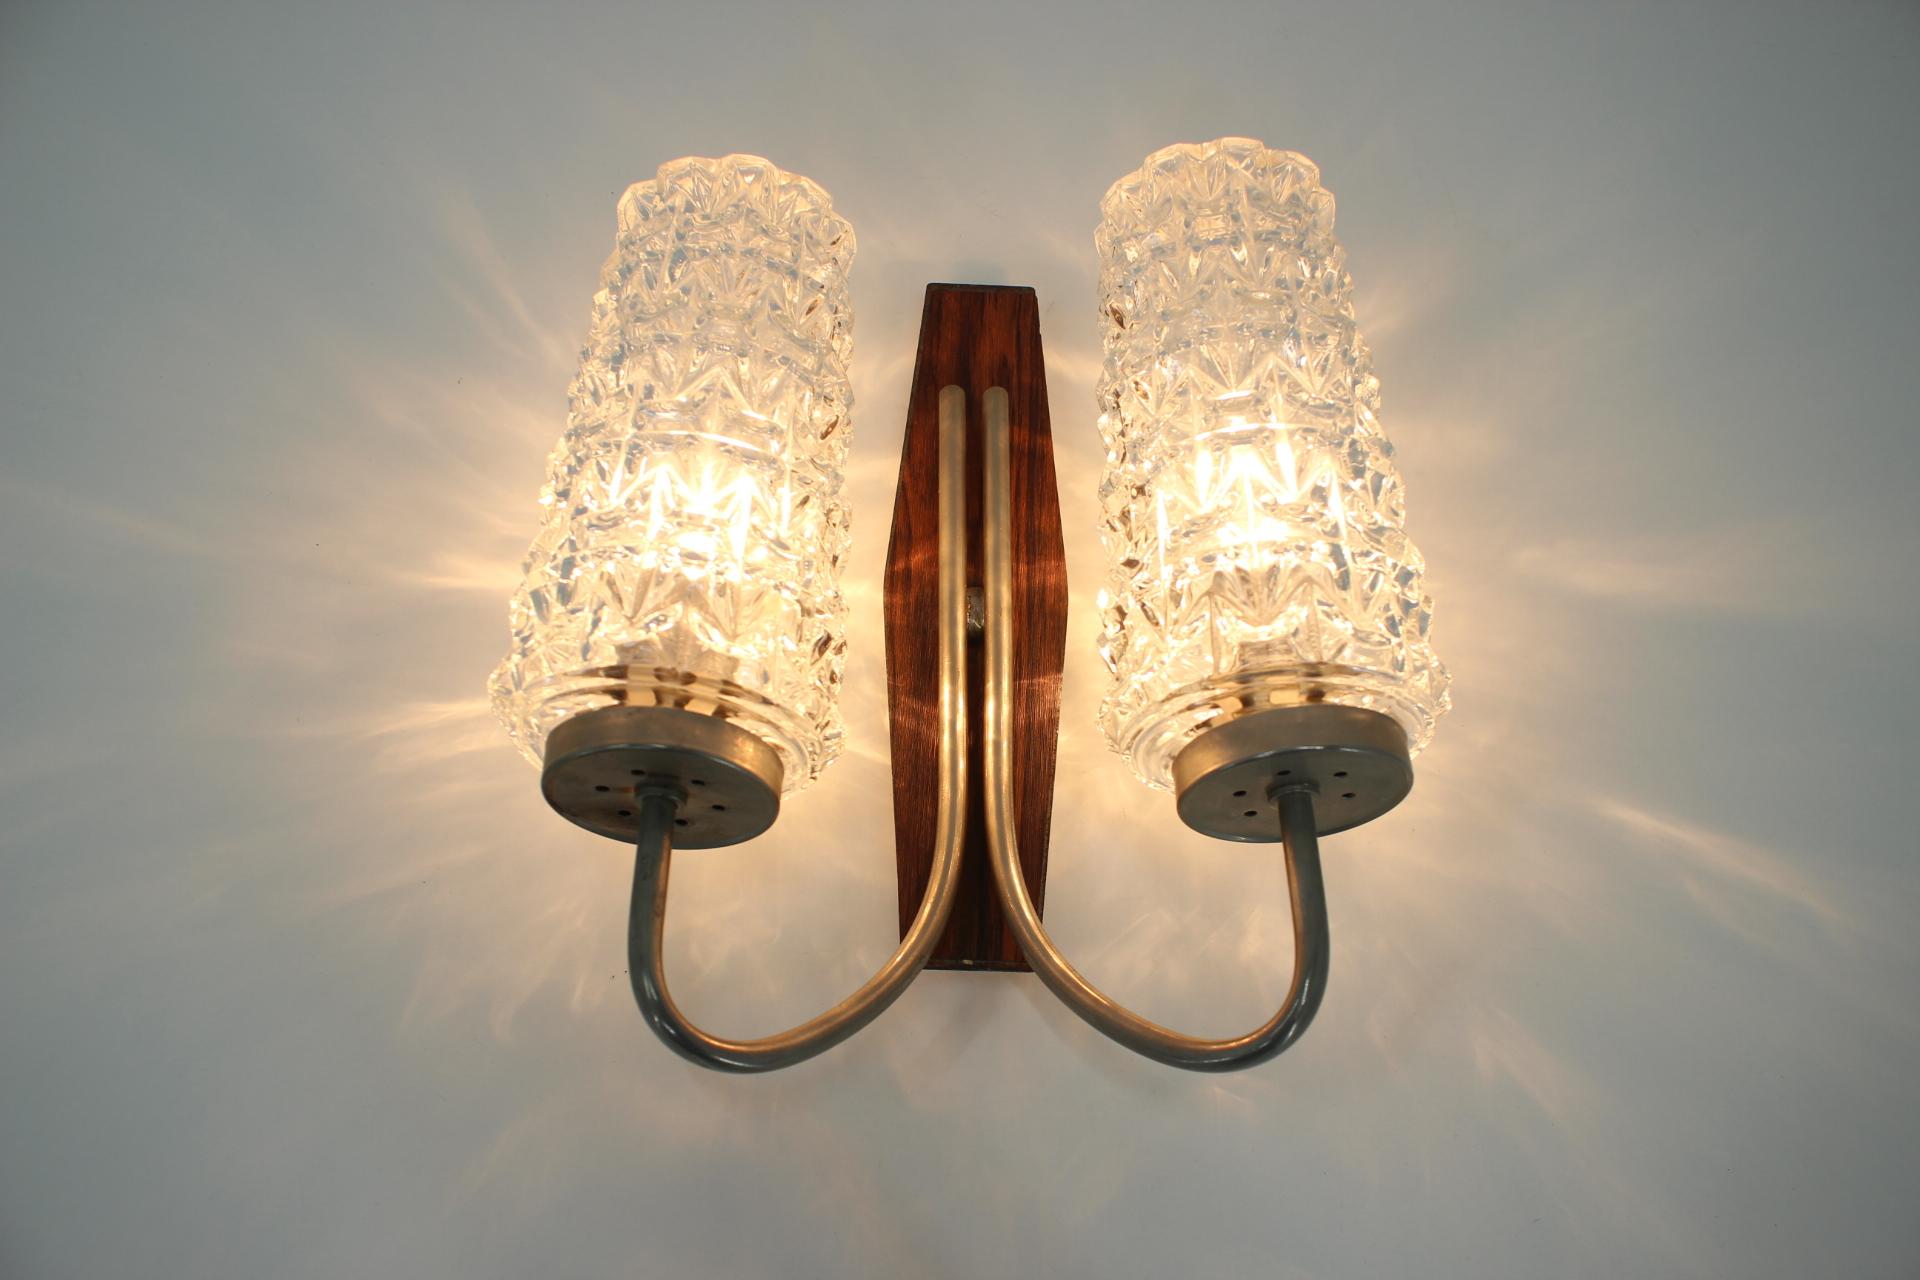 German Midcentury Wall Lamp in Style of Stilnovo, 1970s For Sale